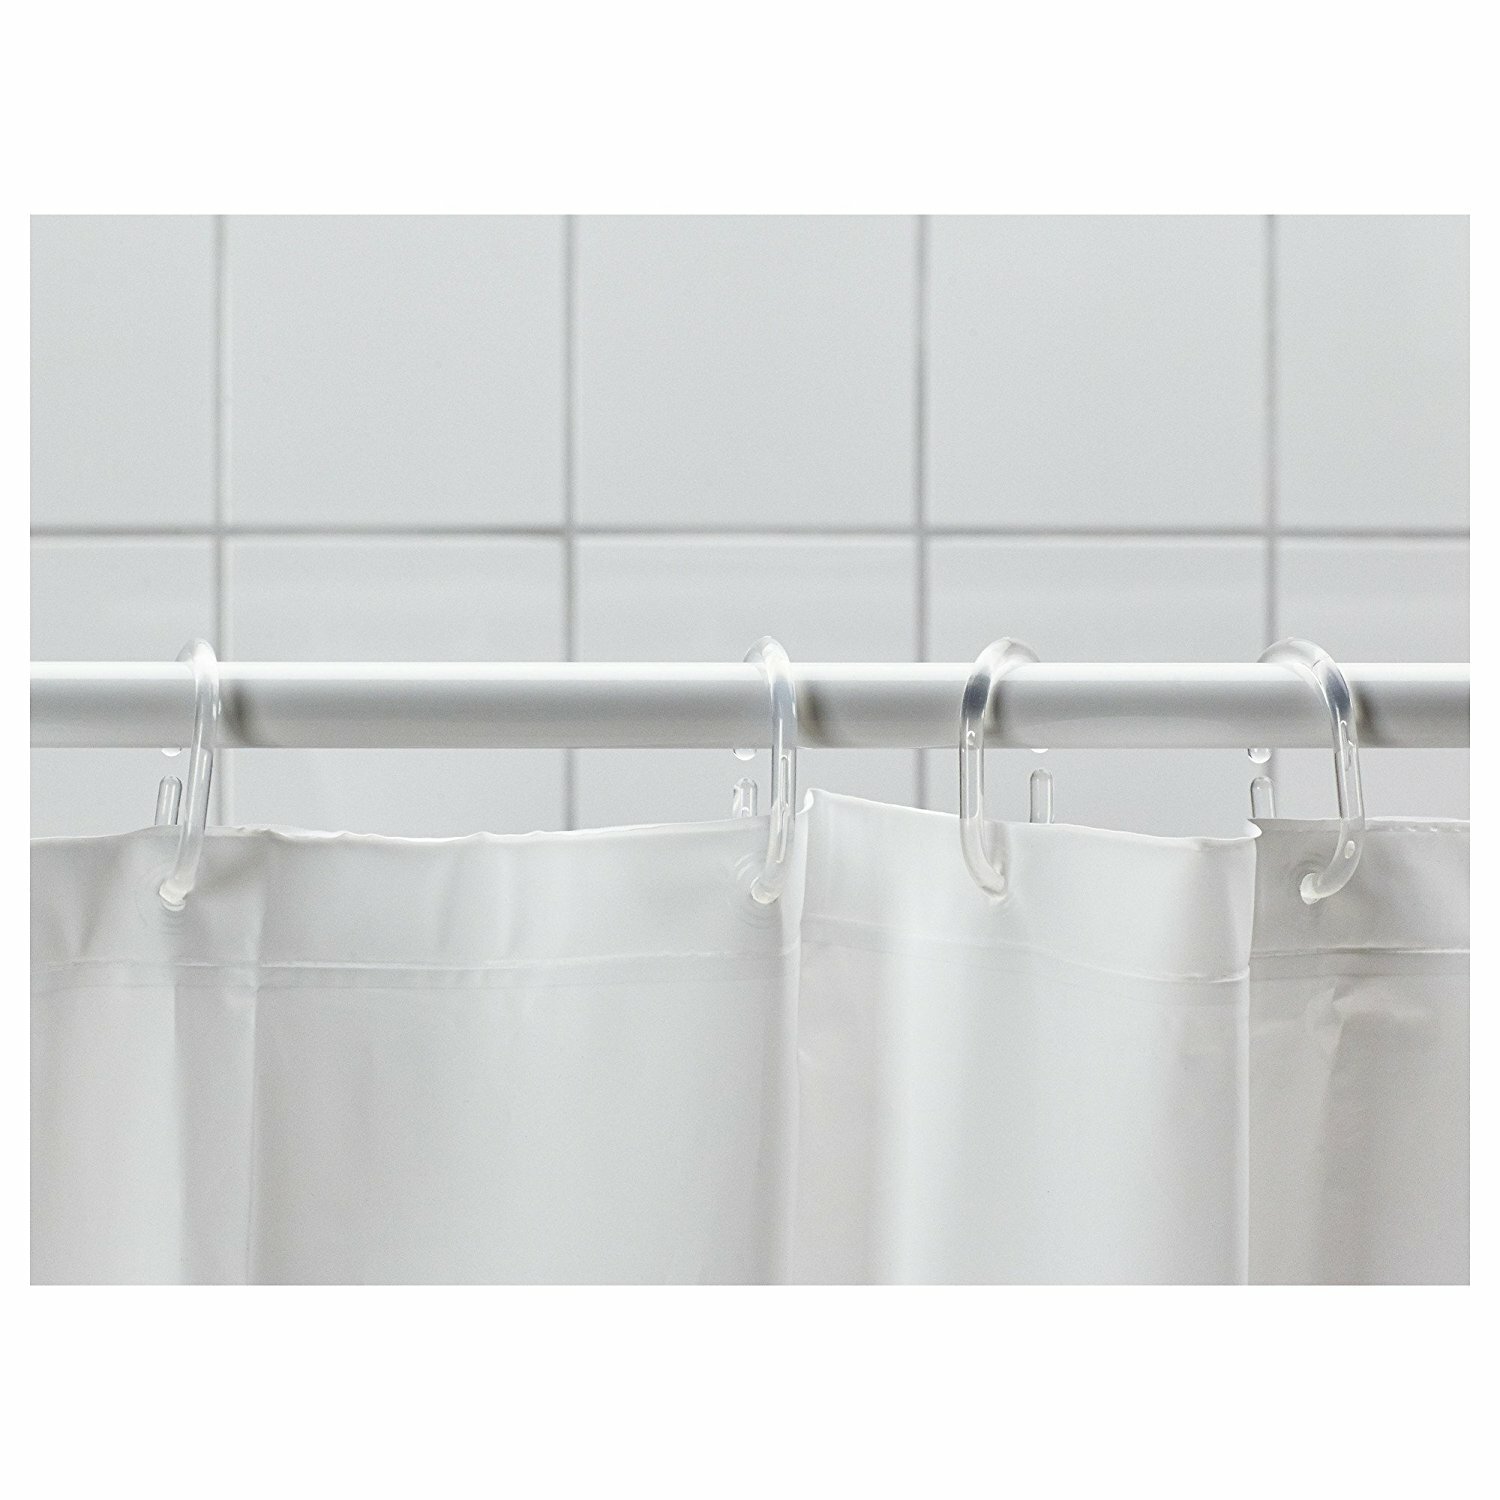 Ikea Shower Curtain for Best Your Bathroom Decoration: Spring Loaded Curtain Rod Ikea | Shower Curtain Length | Ikea Shower Curtain